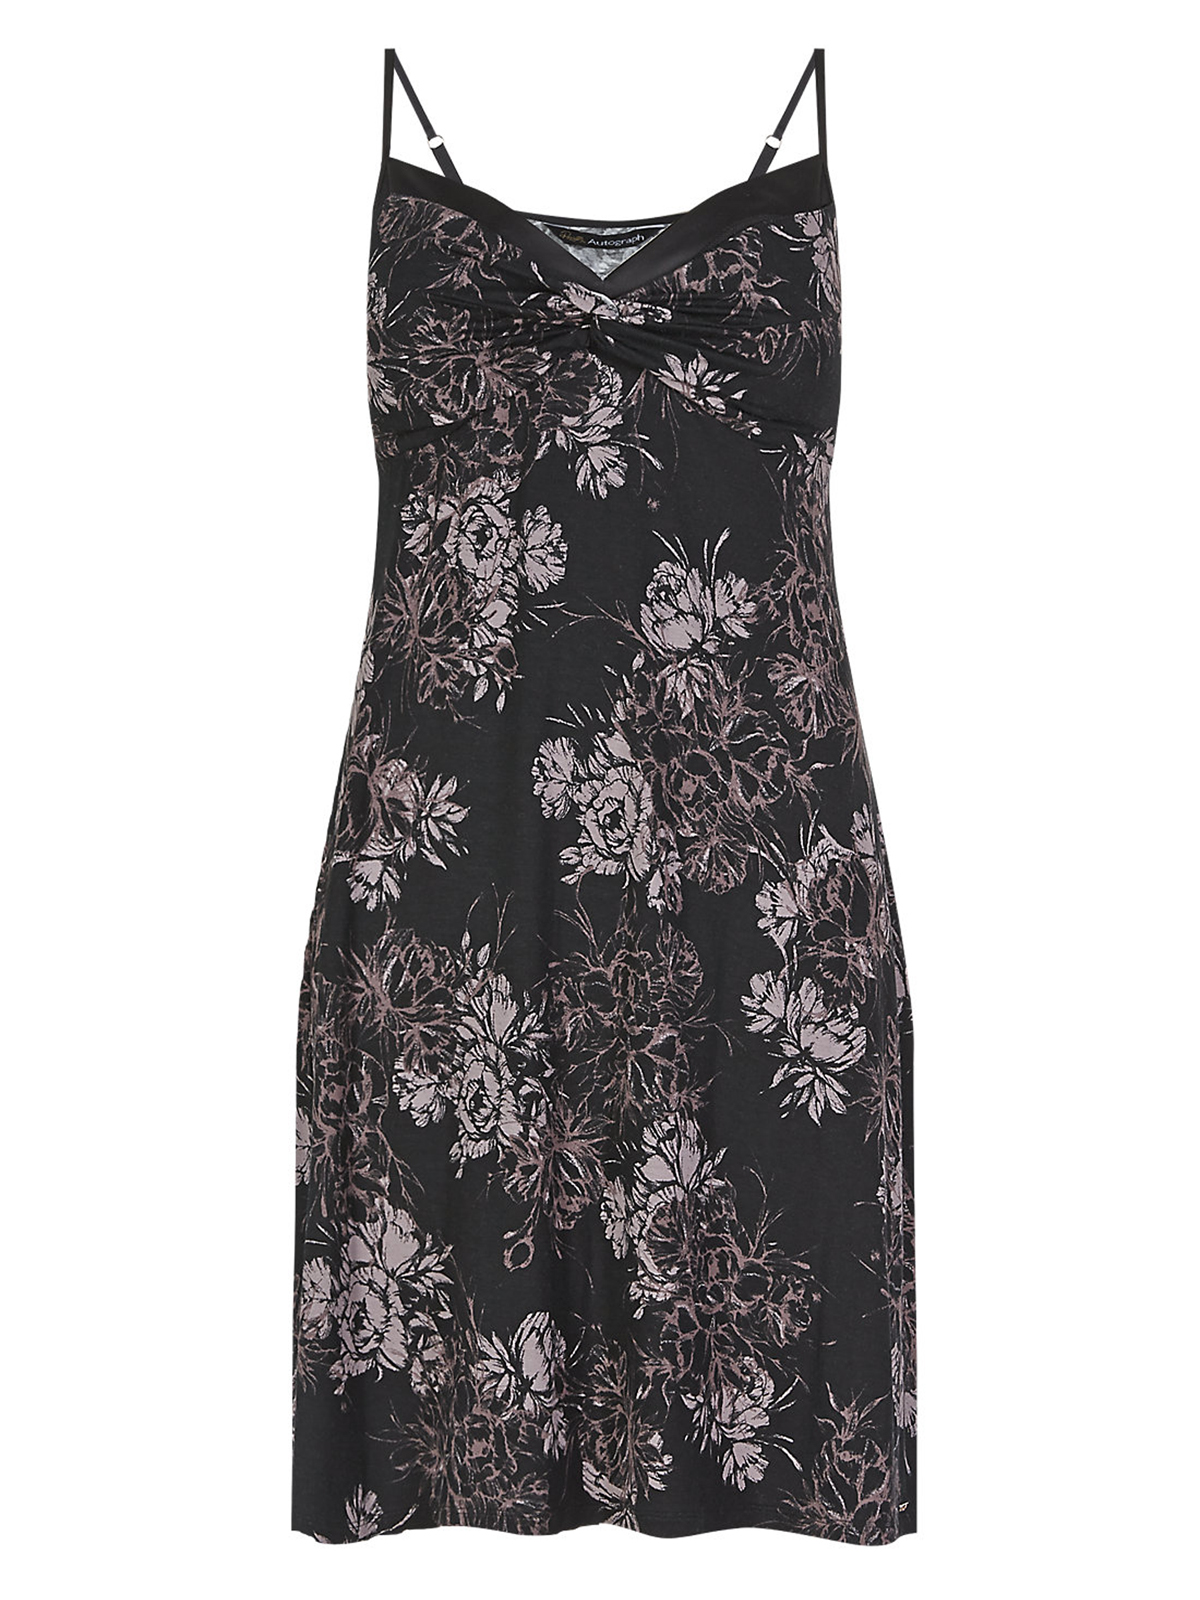 Marks and Spencer - - M&5 ASSORTED Nightdresses - Size 12 to 16